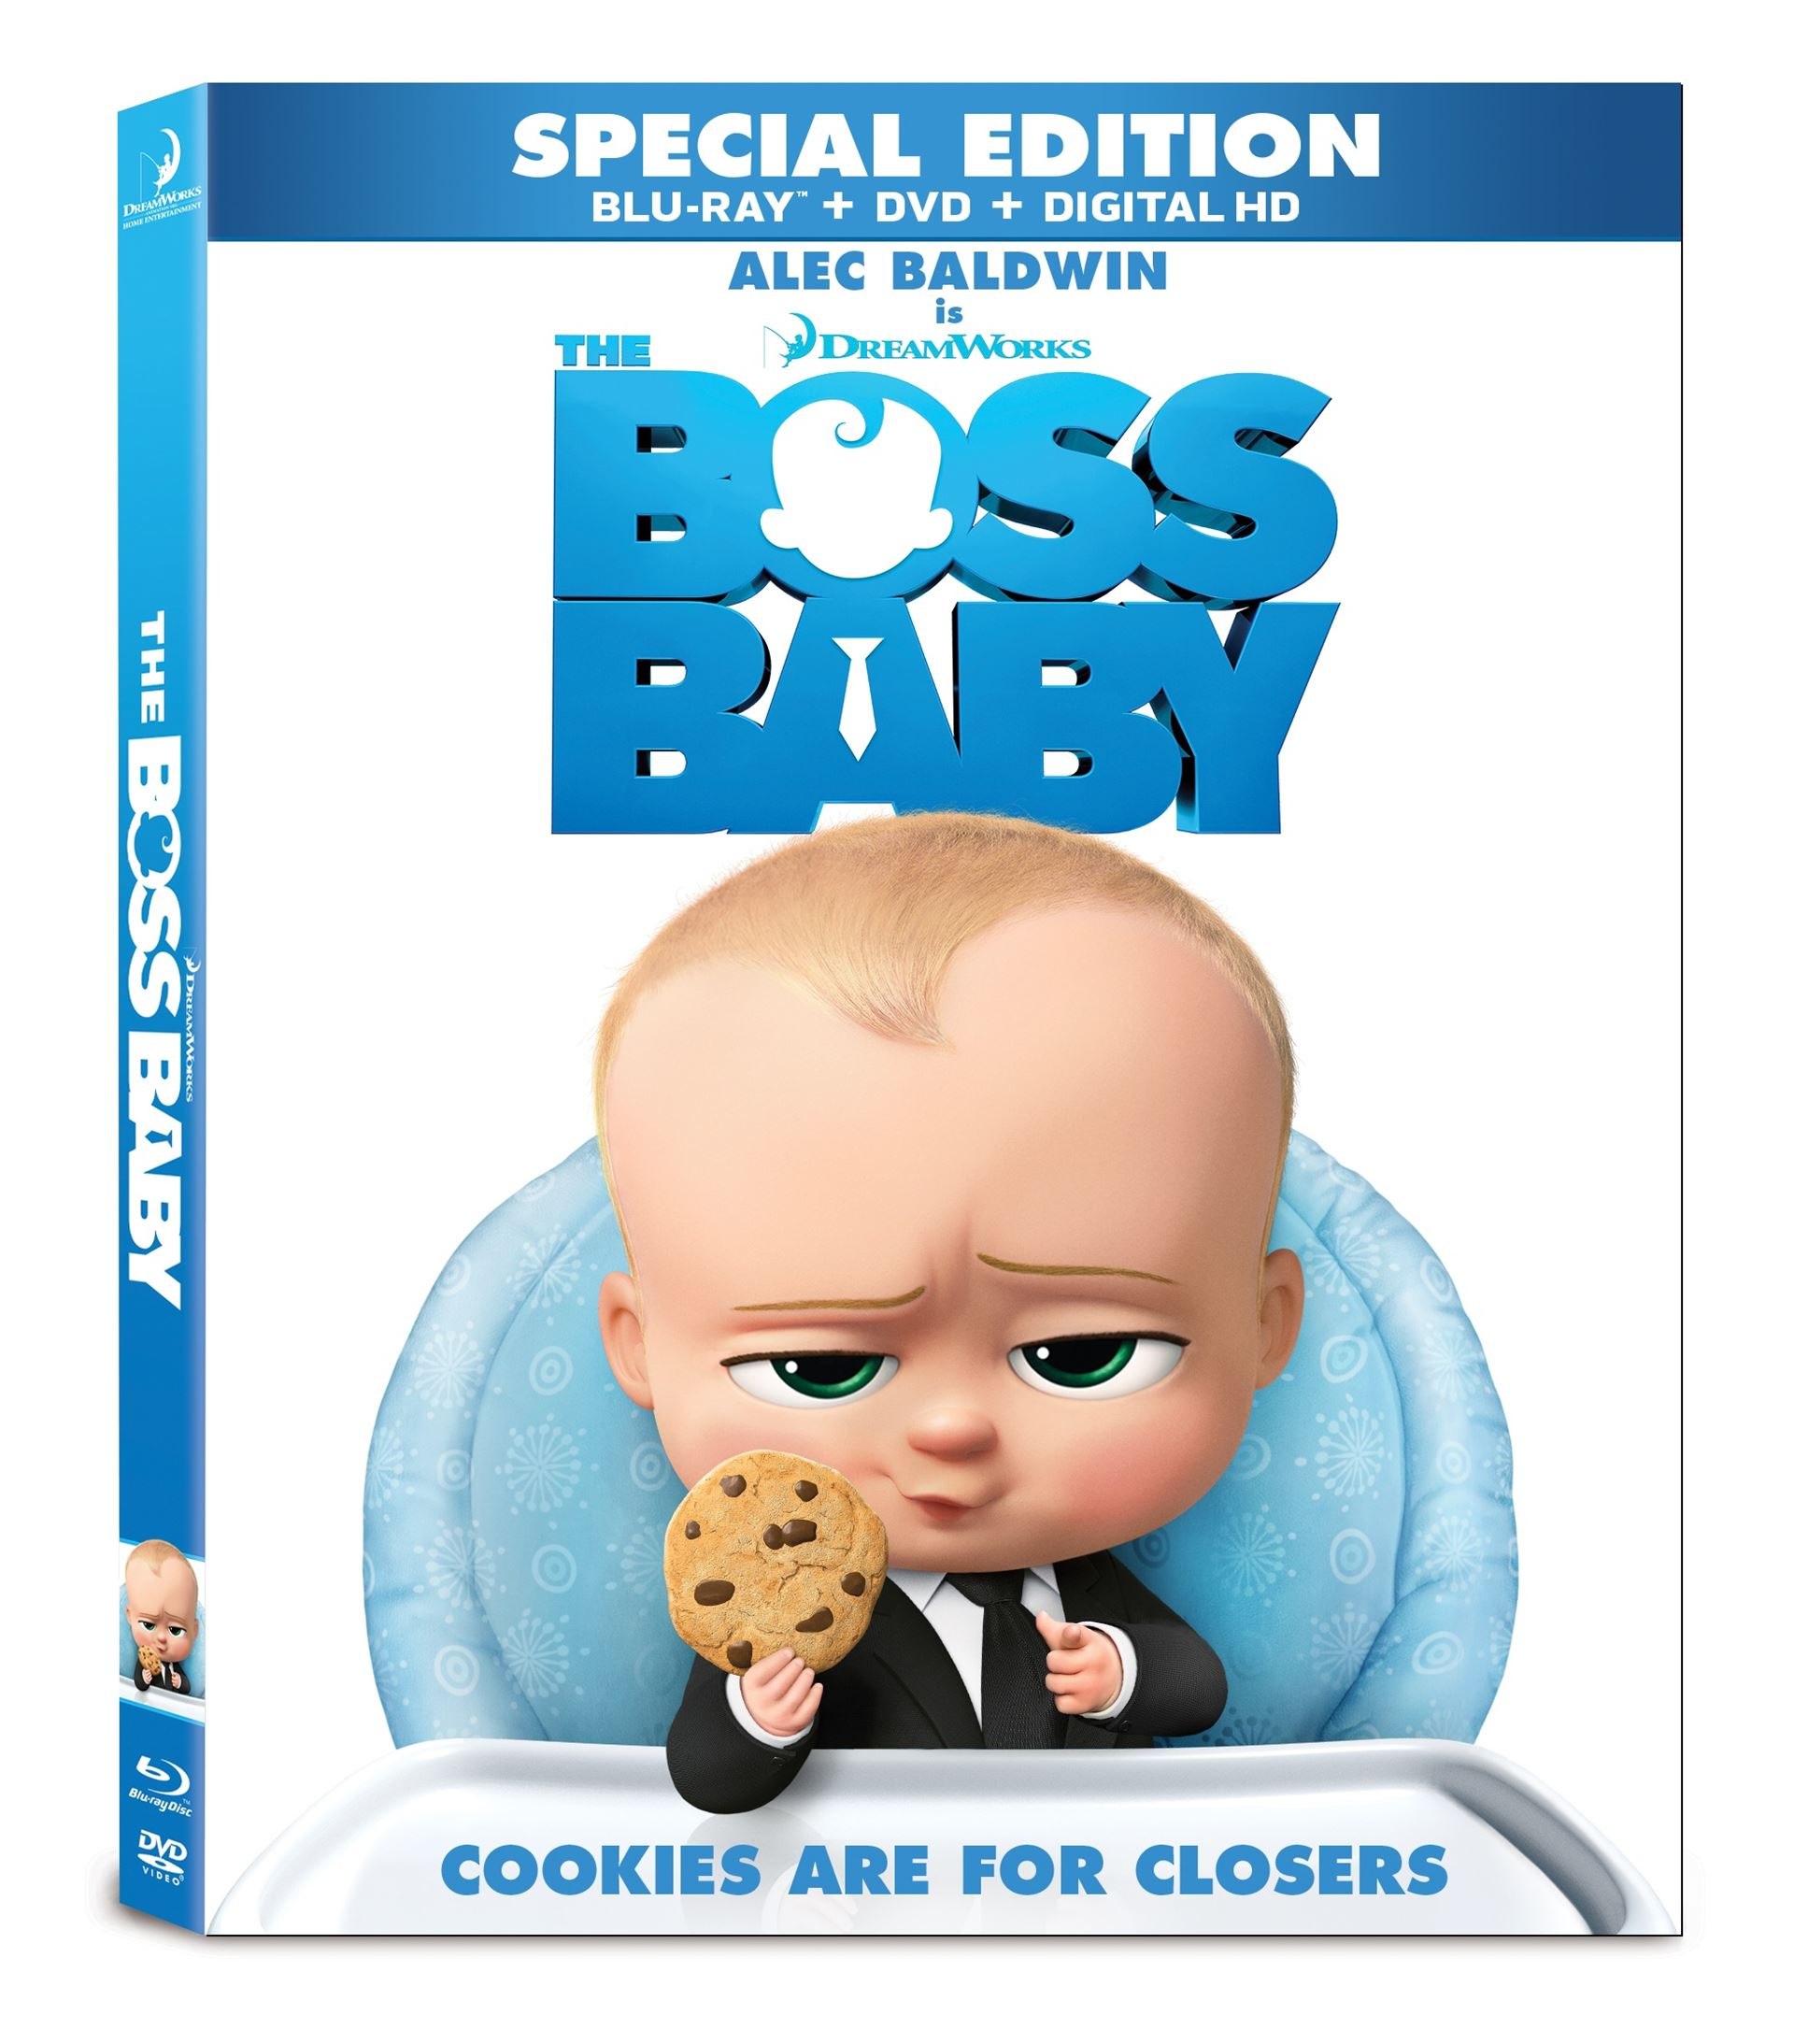 Featurette: DreamWorks Animation's 'The Boss Baby' Now on Blu-ray